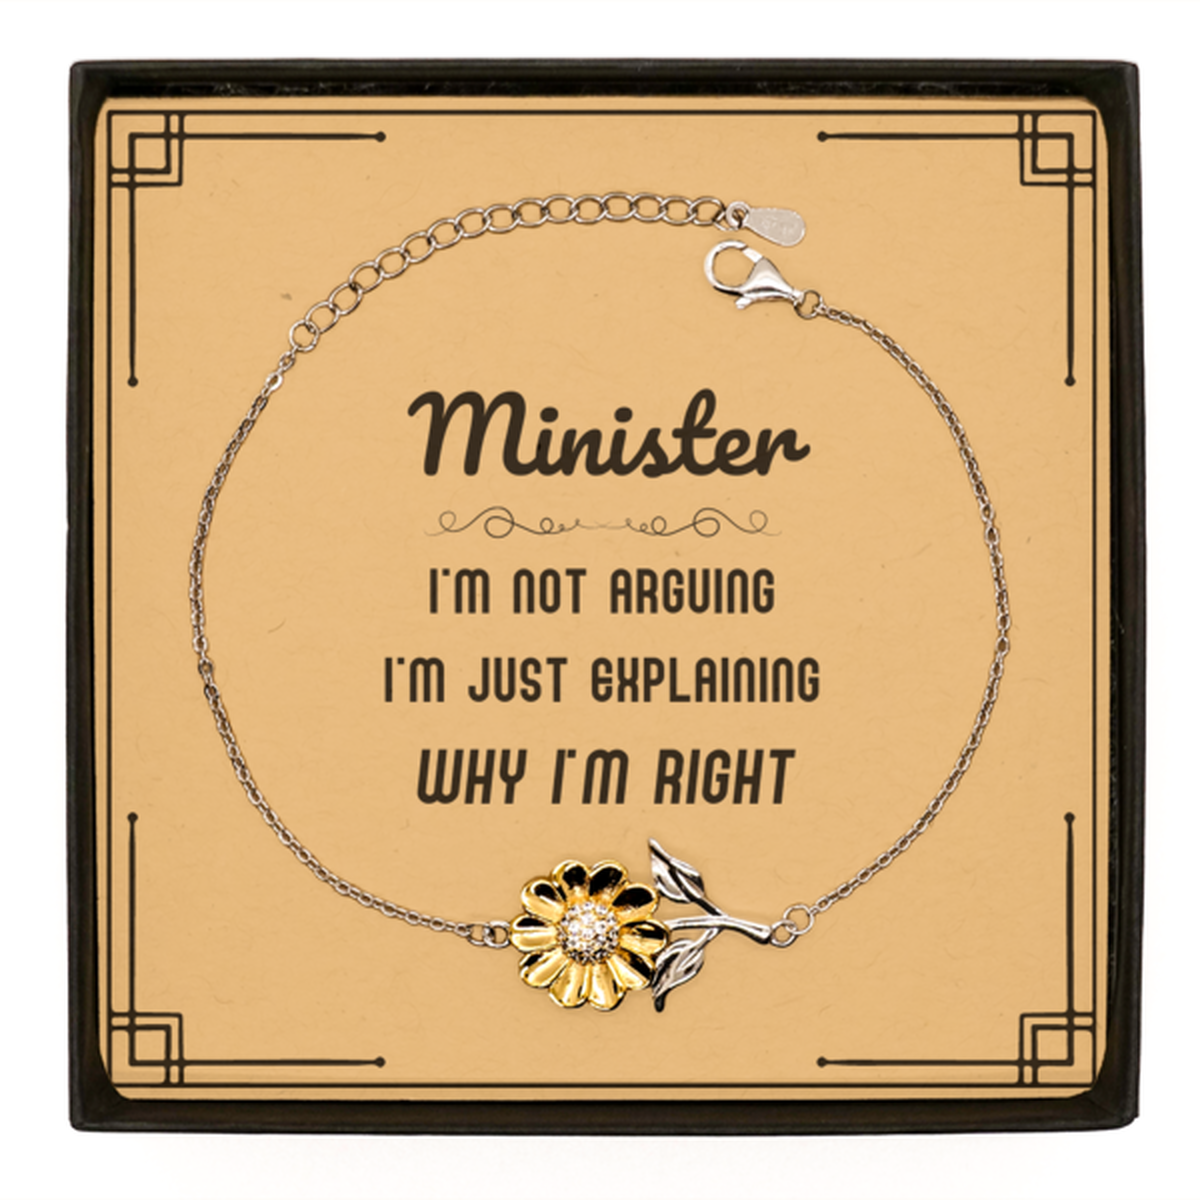 Minister I'm not Arguing. I'm Just Explaining Why I'm RIGHT Sunflower Bracelet, Funny Saying Quote Minister Gifts For Minister Message Card Graduation Birthday Christmas Gifts for Men Women Coworker